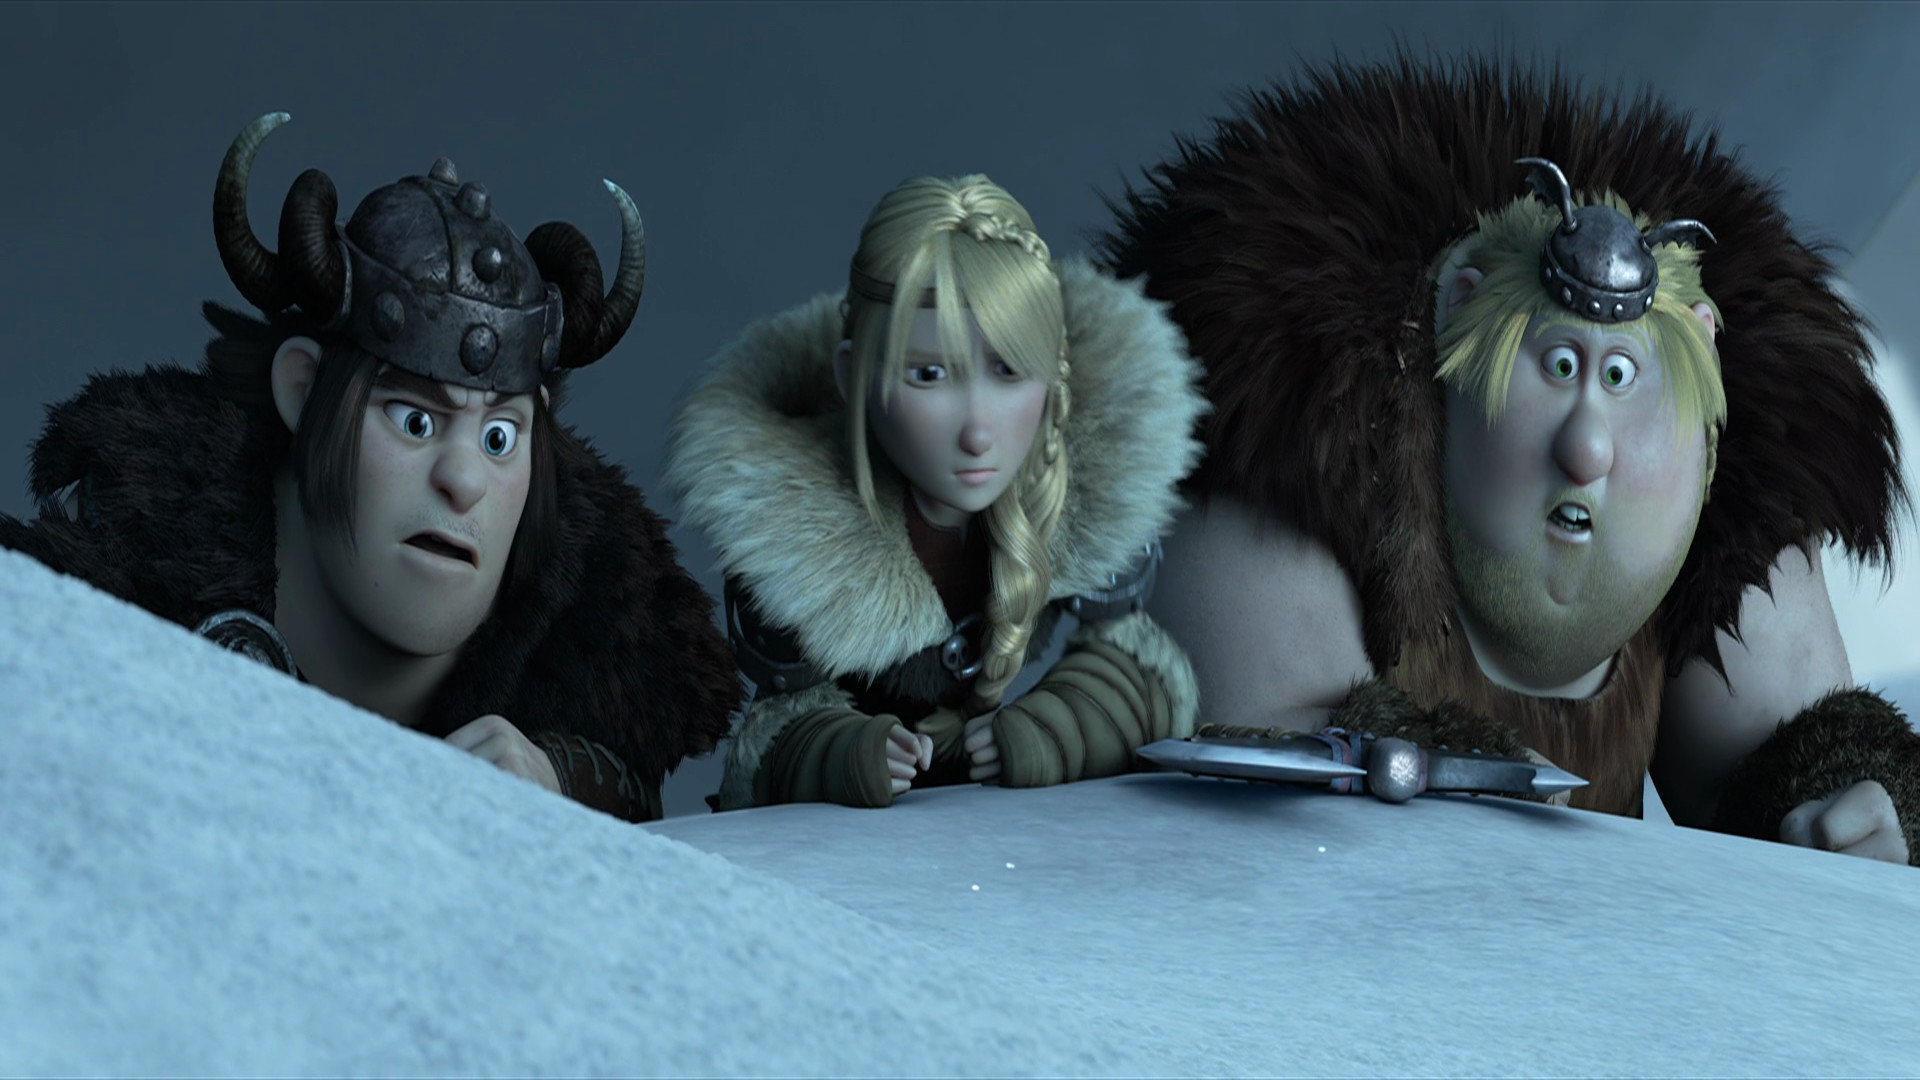 Best How To Train Your Dragon 2 wallpaper ID:90315 for High Resolution full hd 1080p desktop